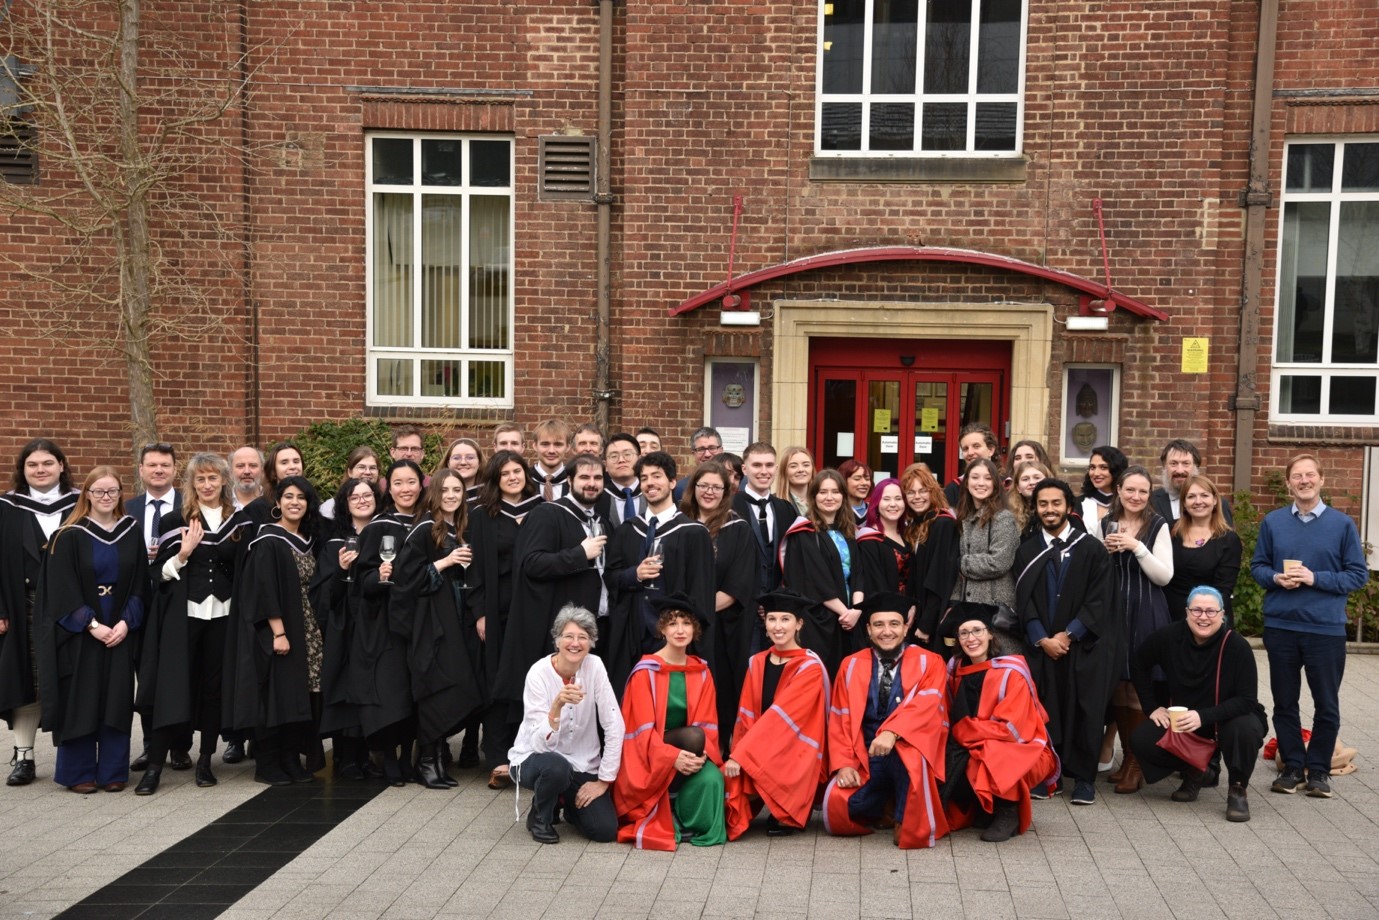 A large group photo in front of the red-brick Dawson Building, with most of the group wearing graduation gowns.